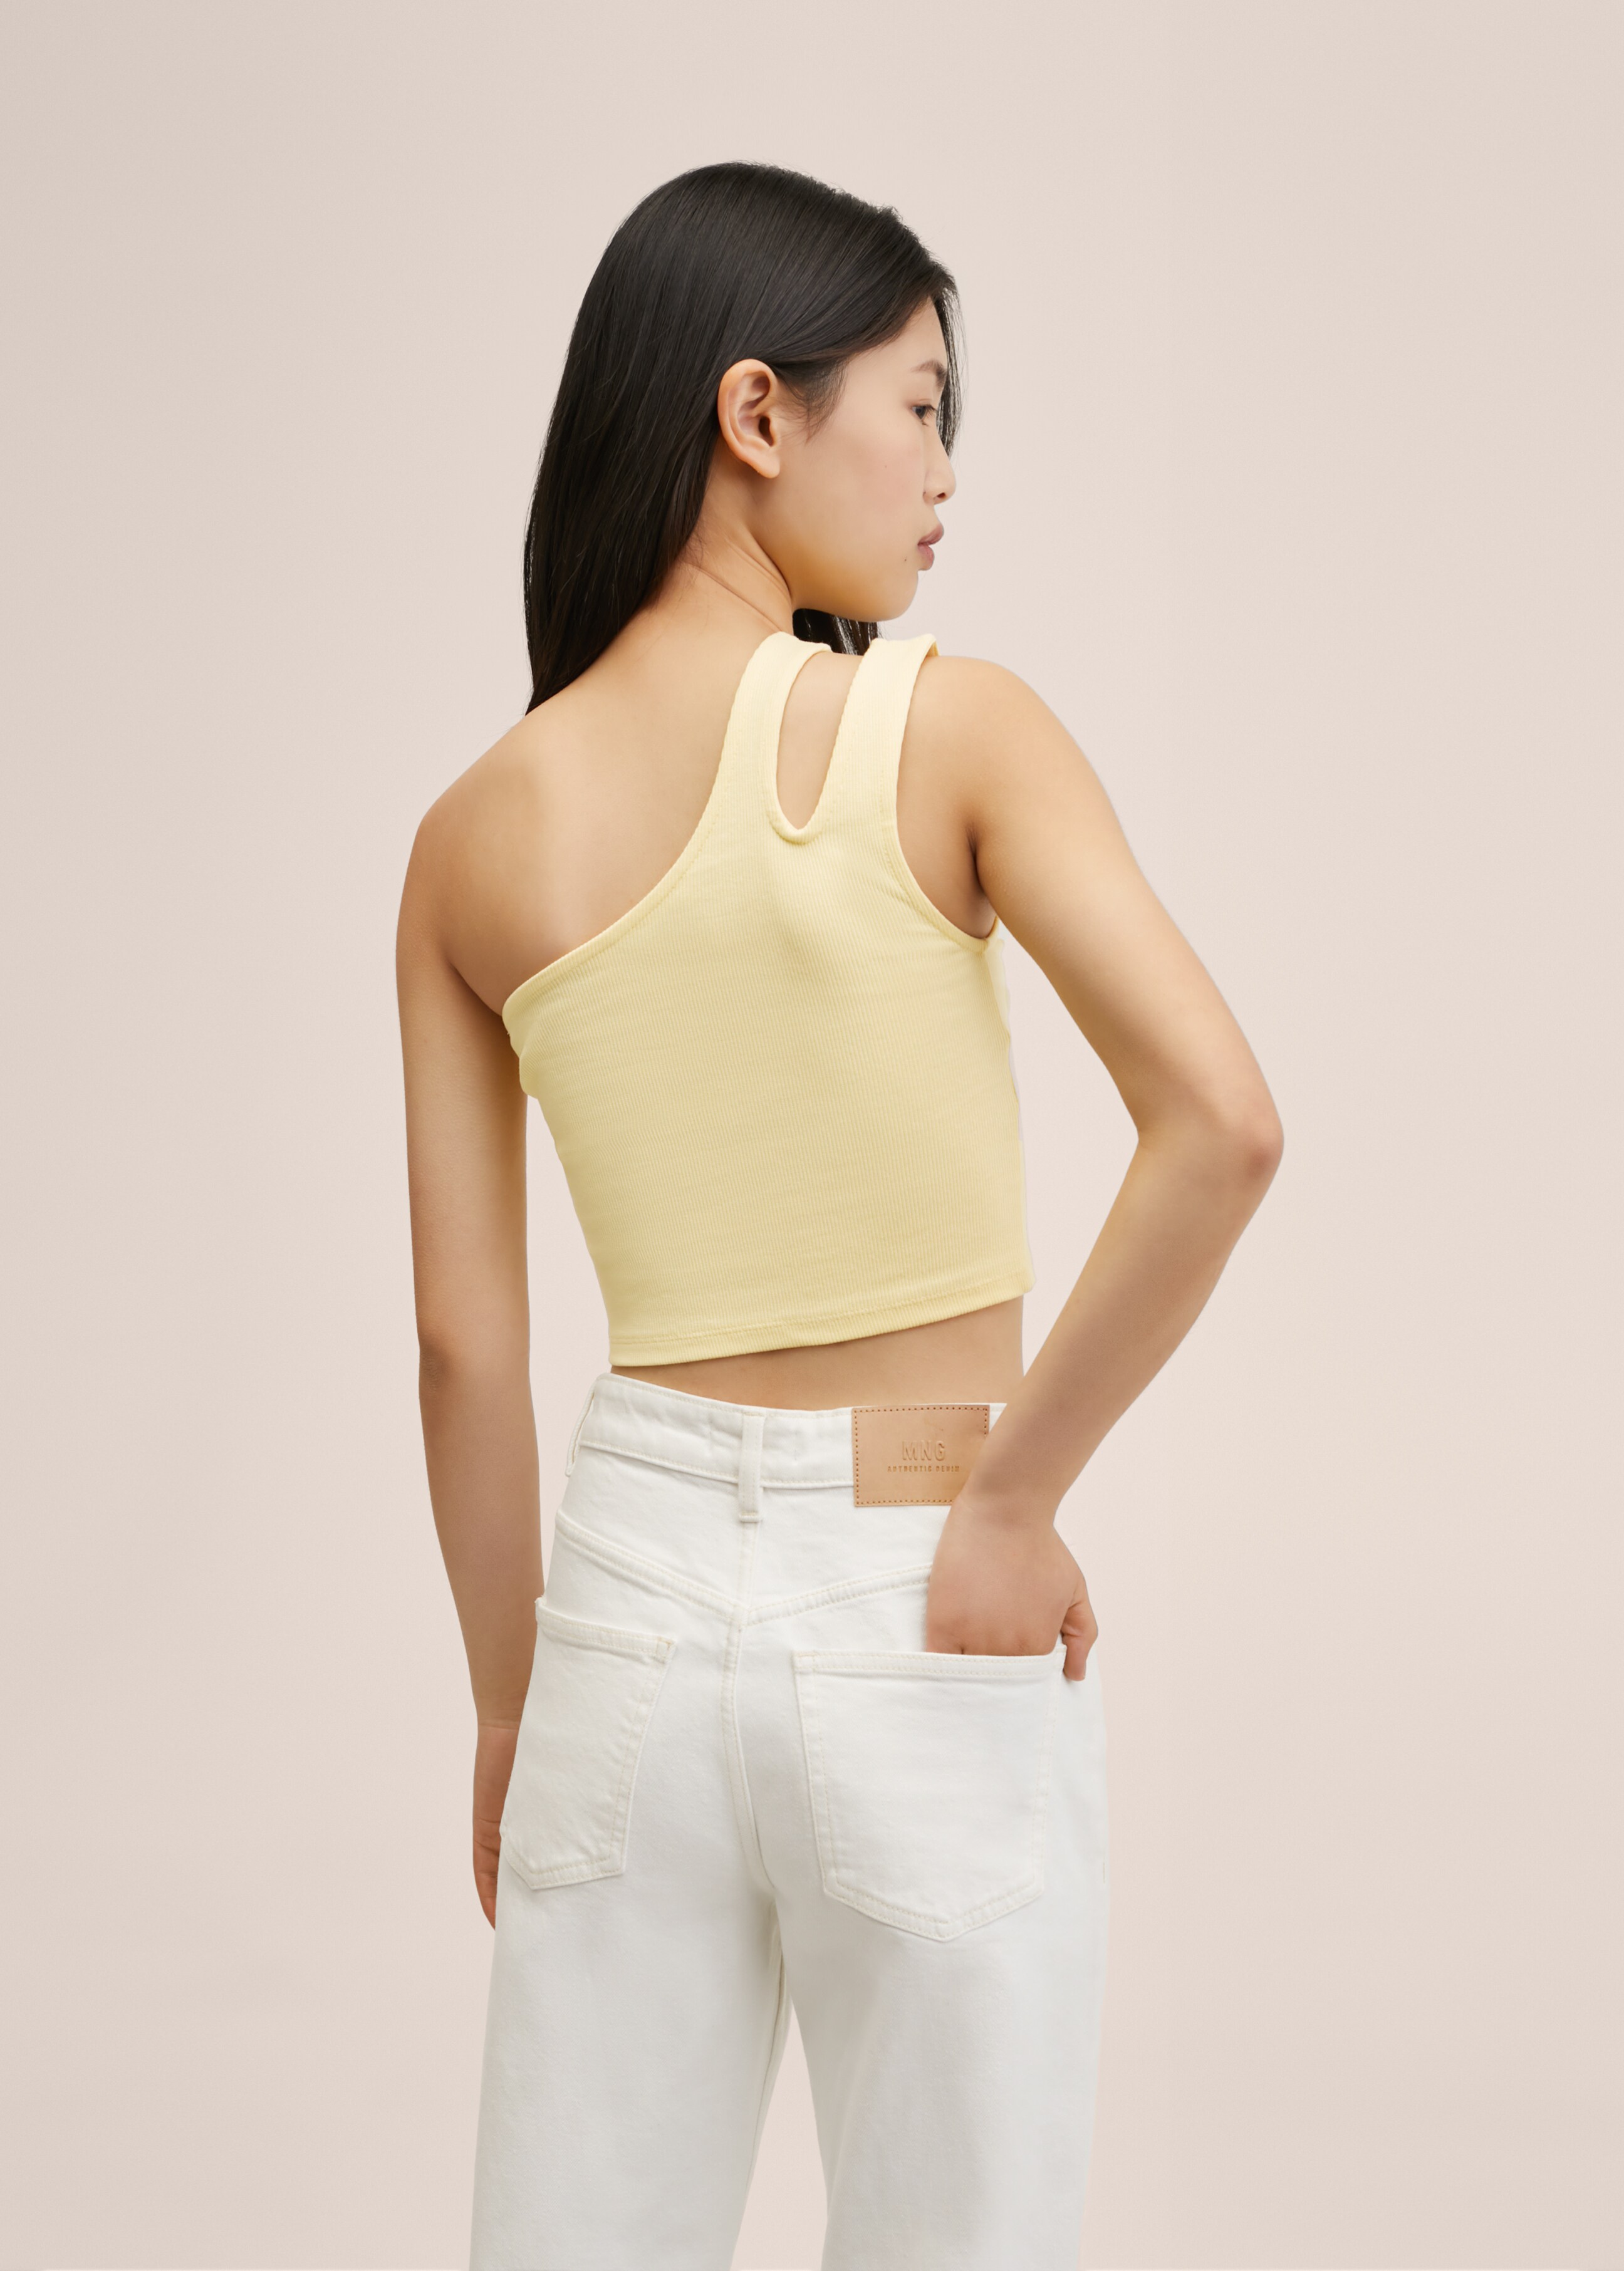 Asymmetrical crop top - Reverse of the article